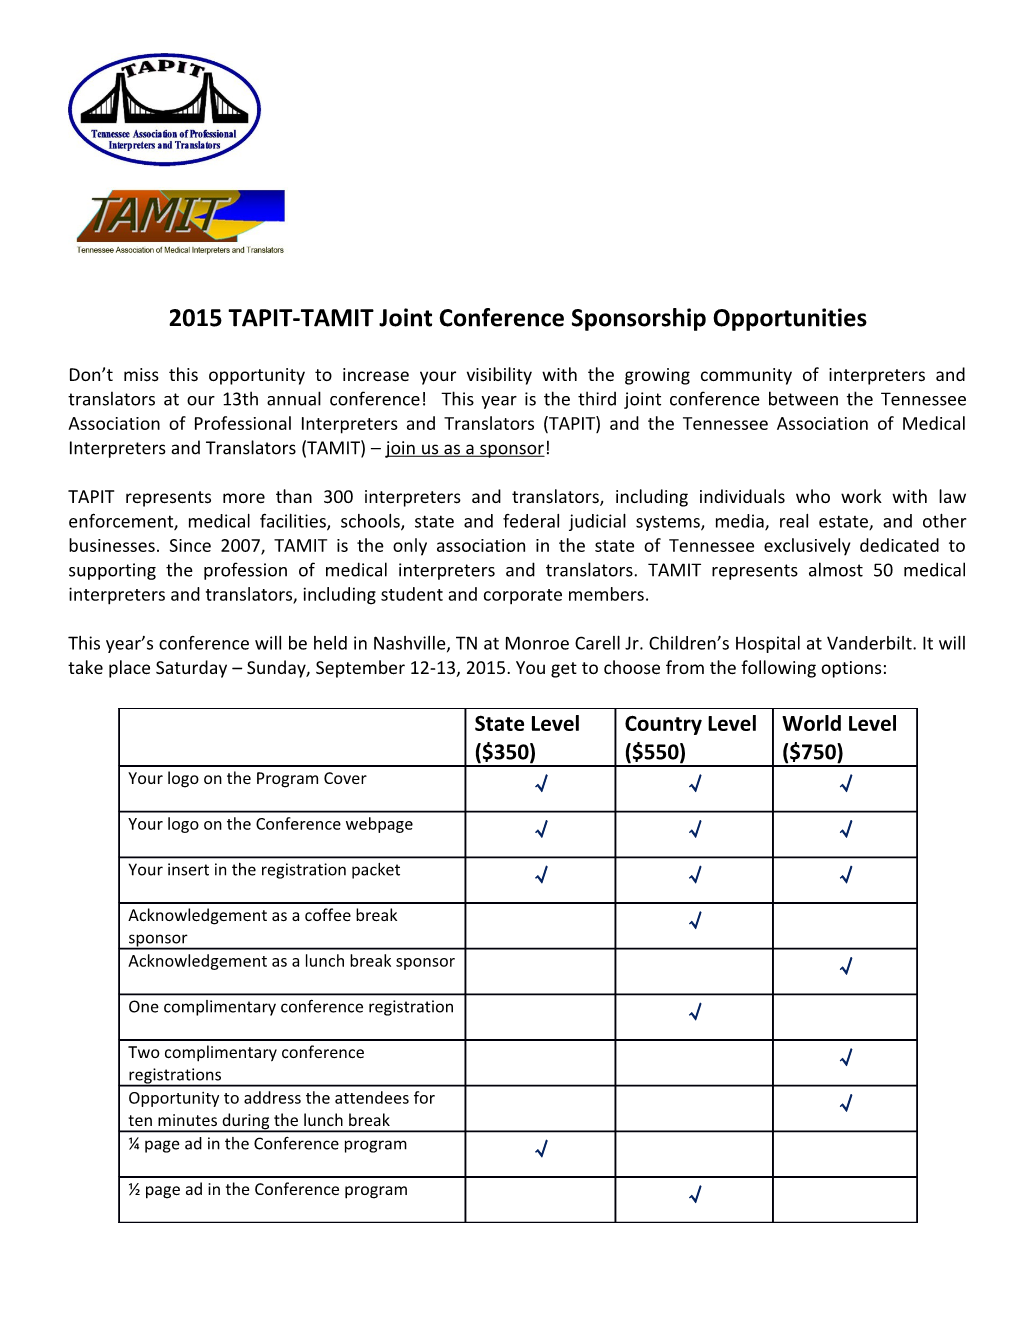 2015 TAPIT-TAMIT Joint Conference Sponsorship Opportunities